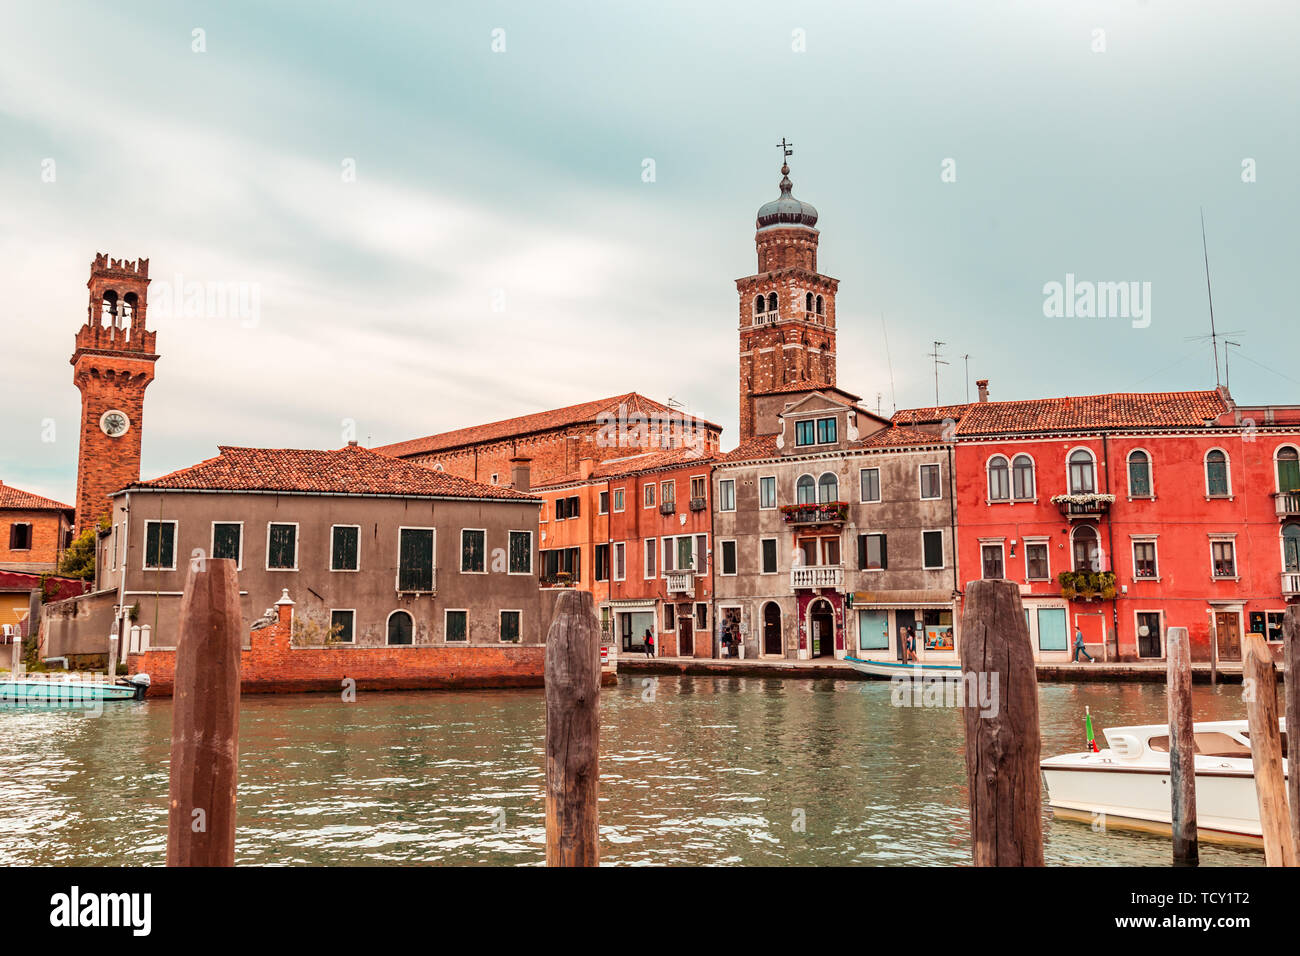 Venice Italy - May 25, 2019: View on Murano island with the central canal, bridge, boats, shops and tourists during sunset Stock Photo